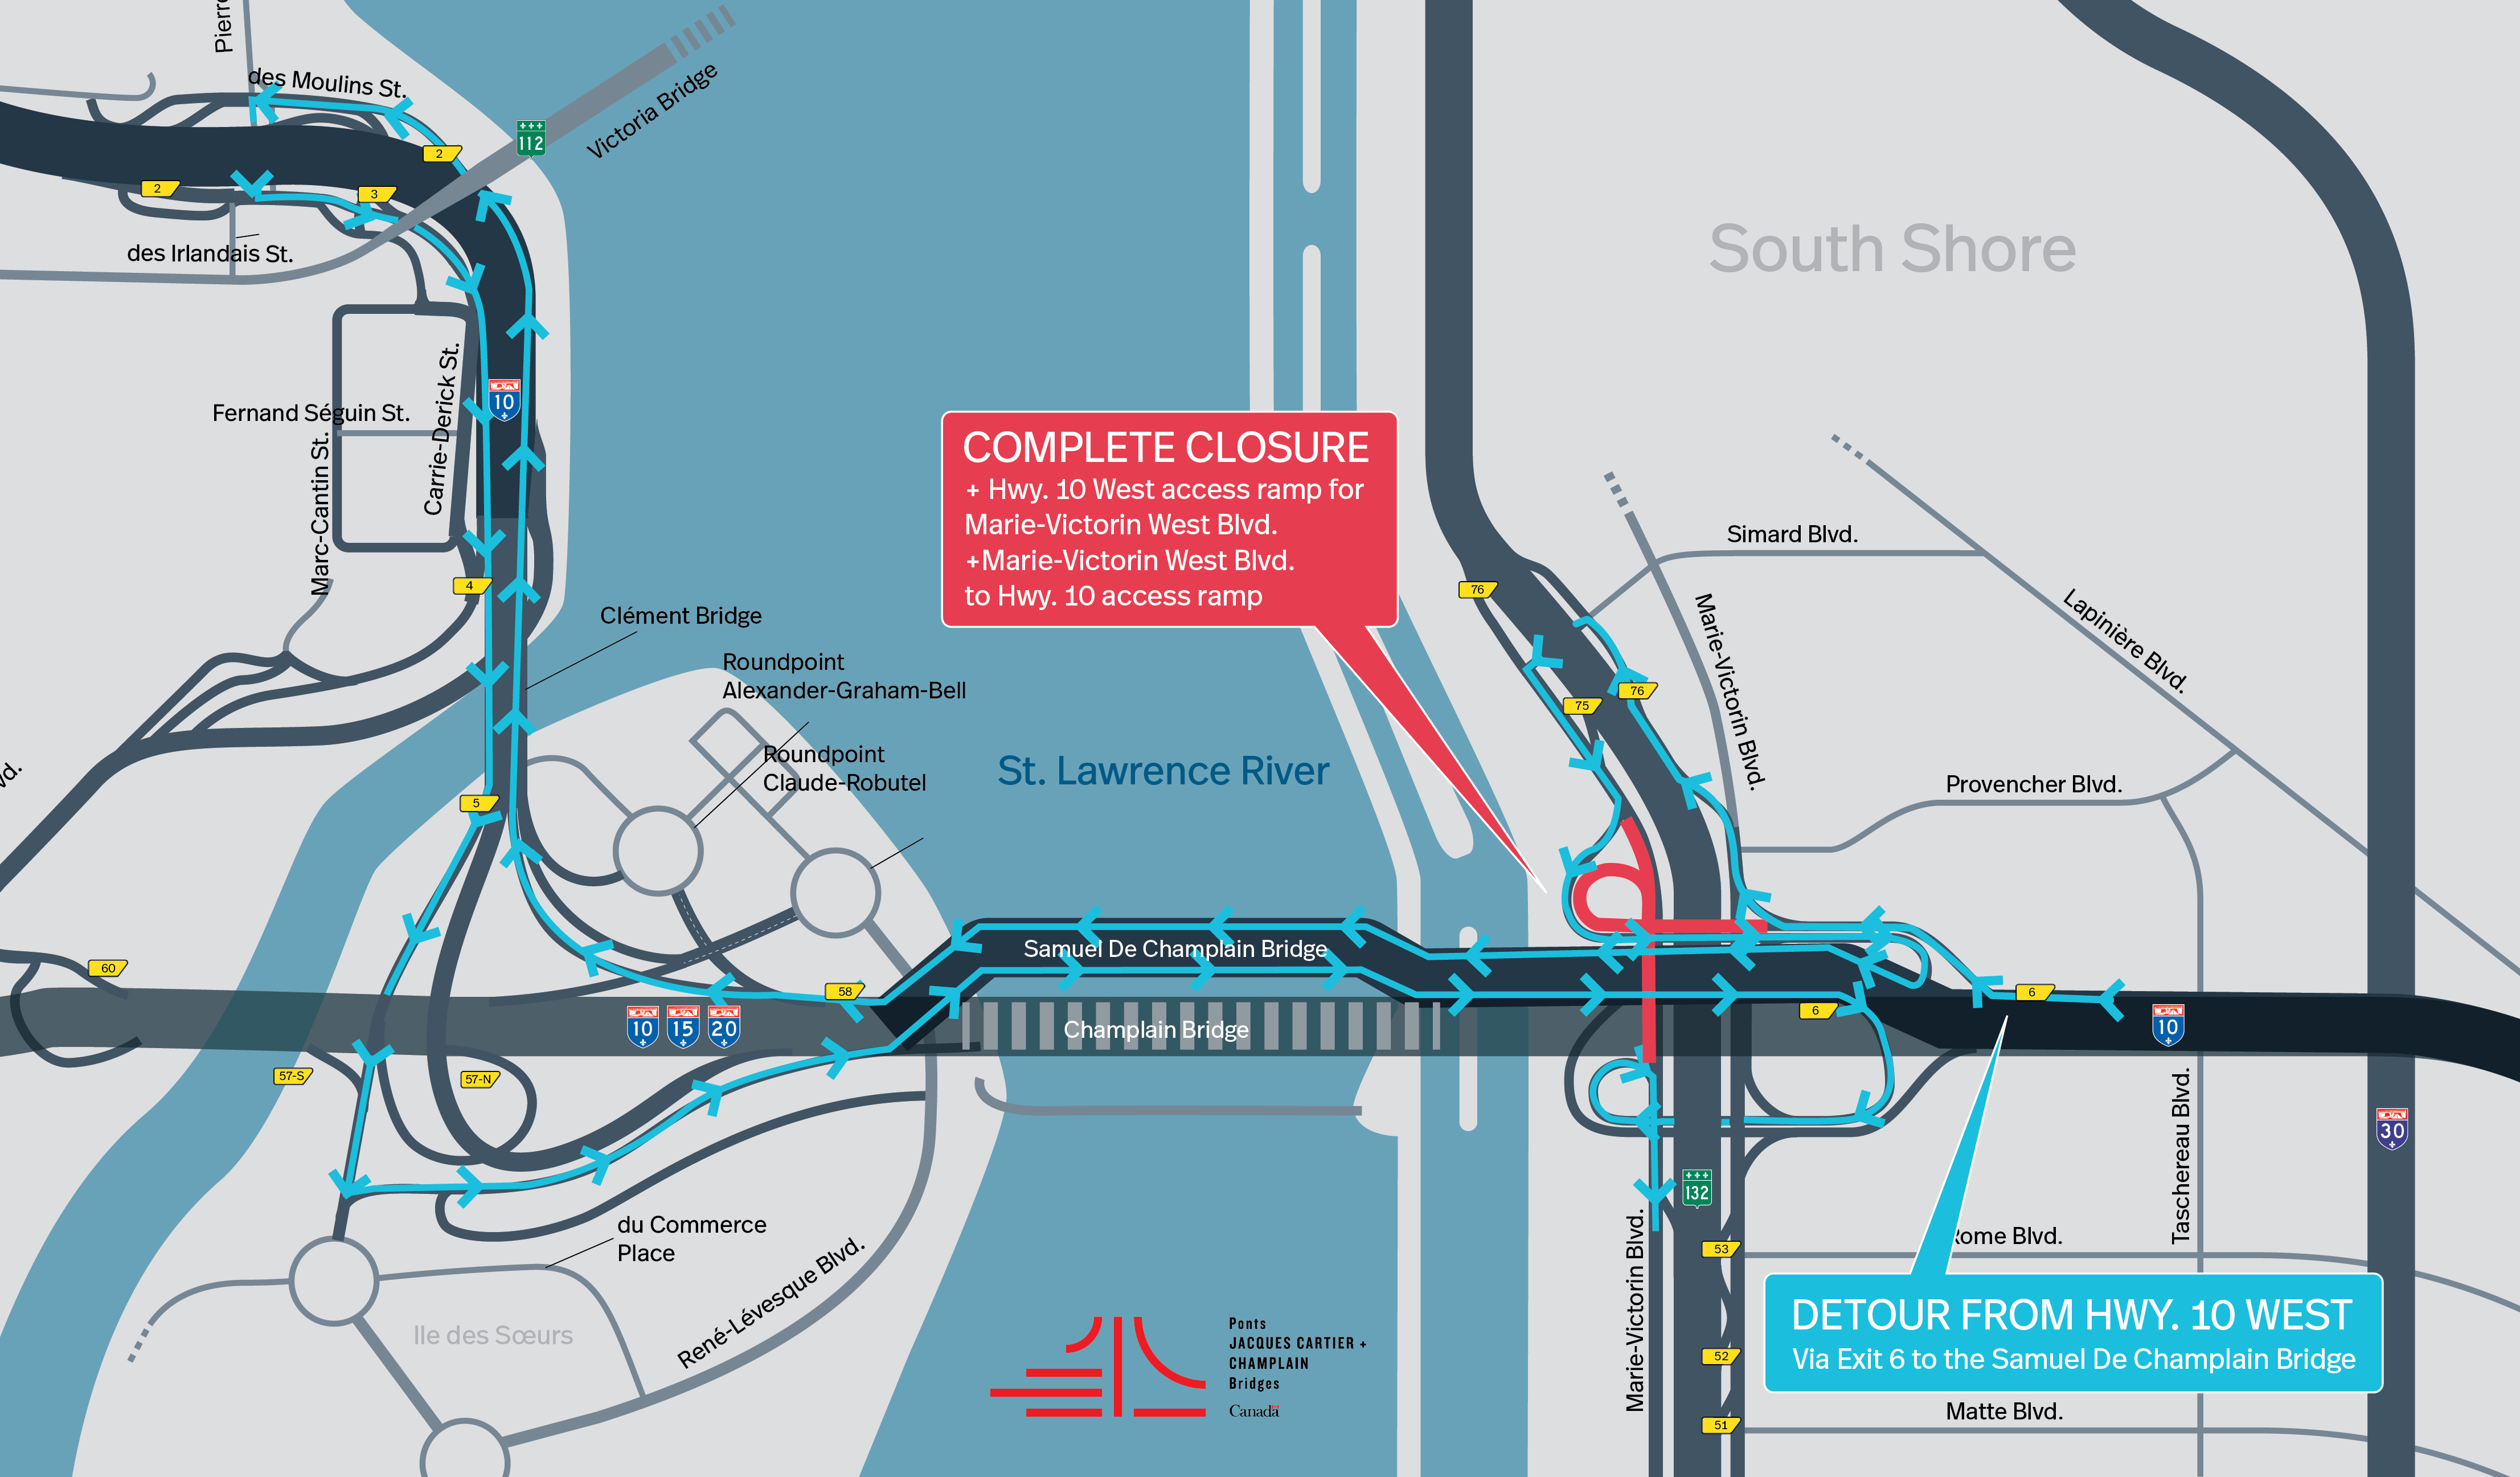 Brossard Sector | Complete closure of Blvd. Marie-Victorin West and from the Hwy. 10 West access ramp toward Blvd. Marie-Victorin West, on April 18